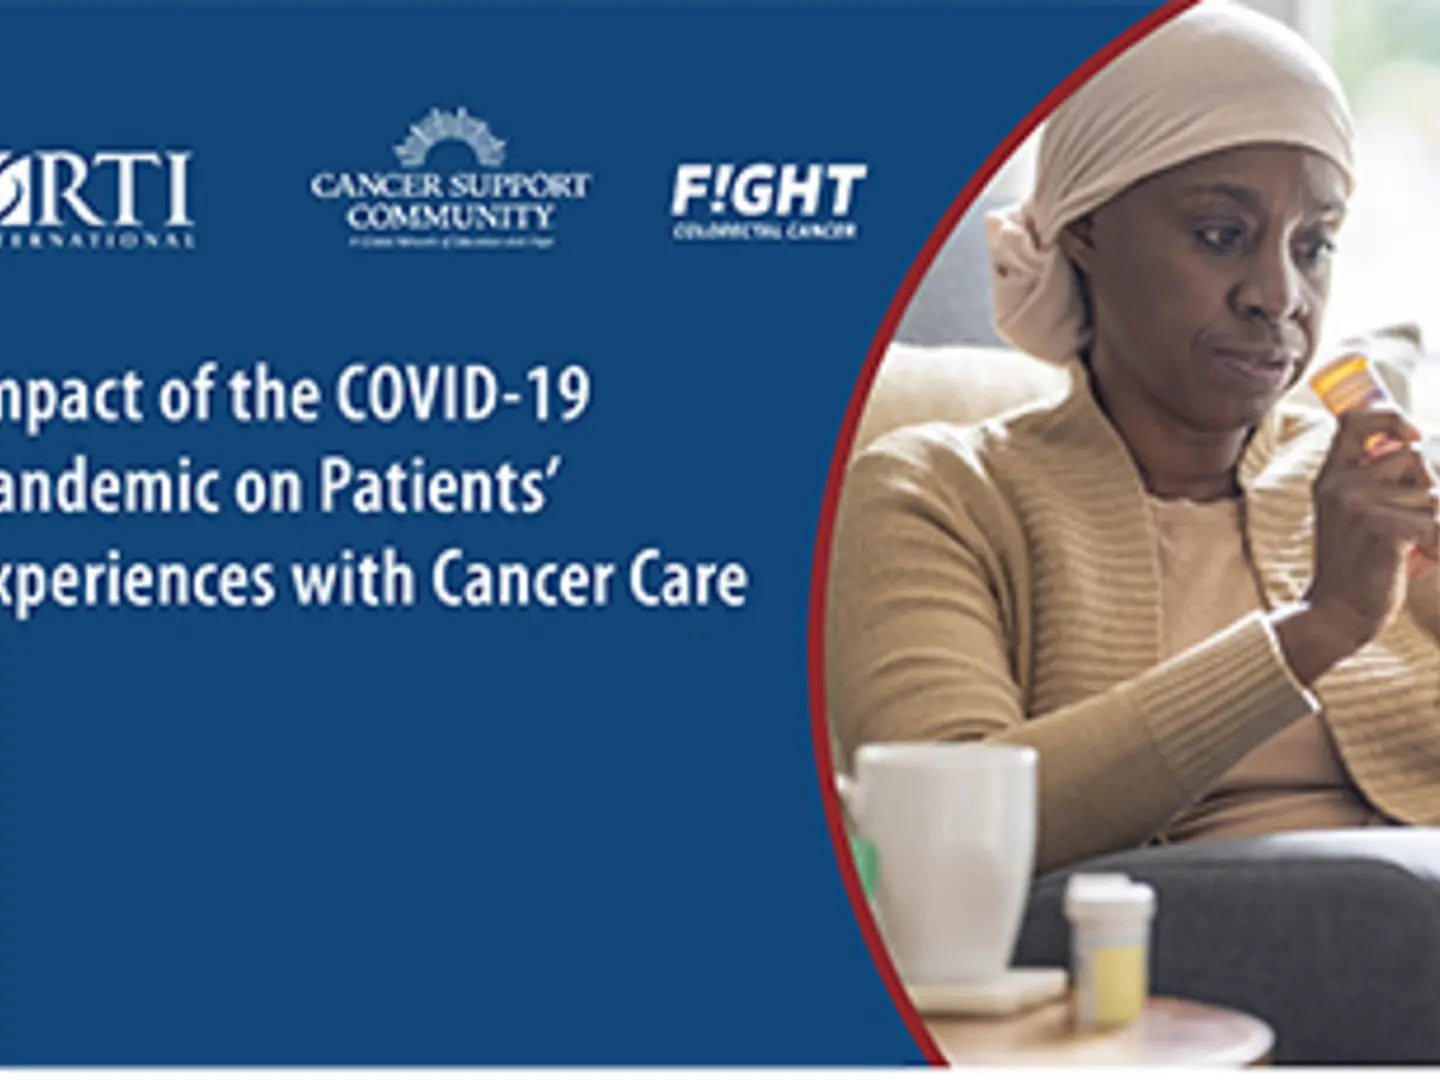 Image of the cover of the research brief "Impact of the COVID-19 Pandemic on Patients' Experiences with Cancer Care."